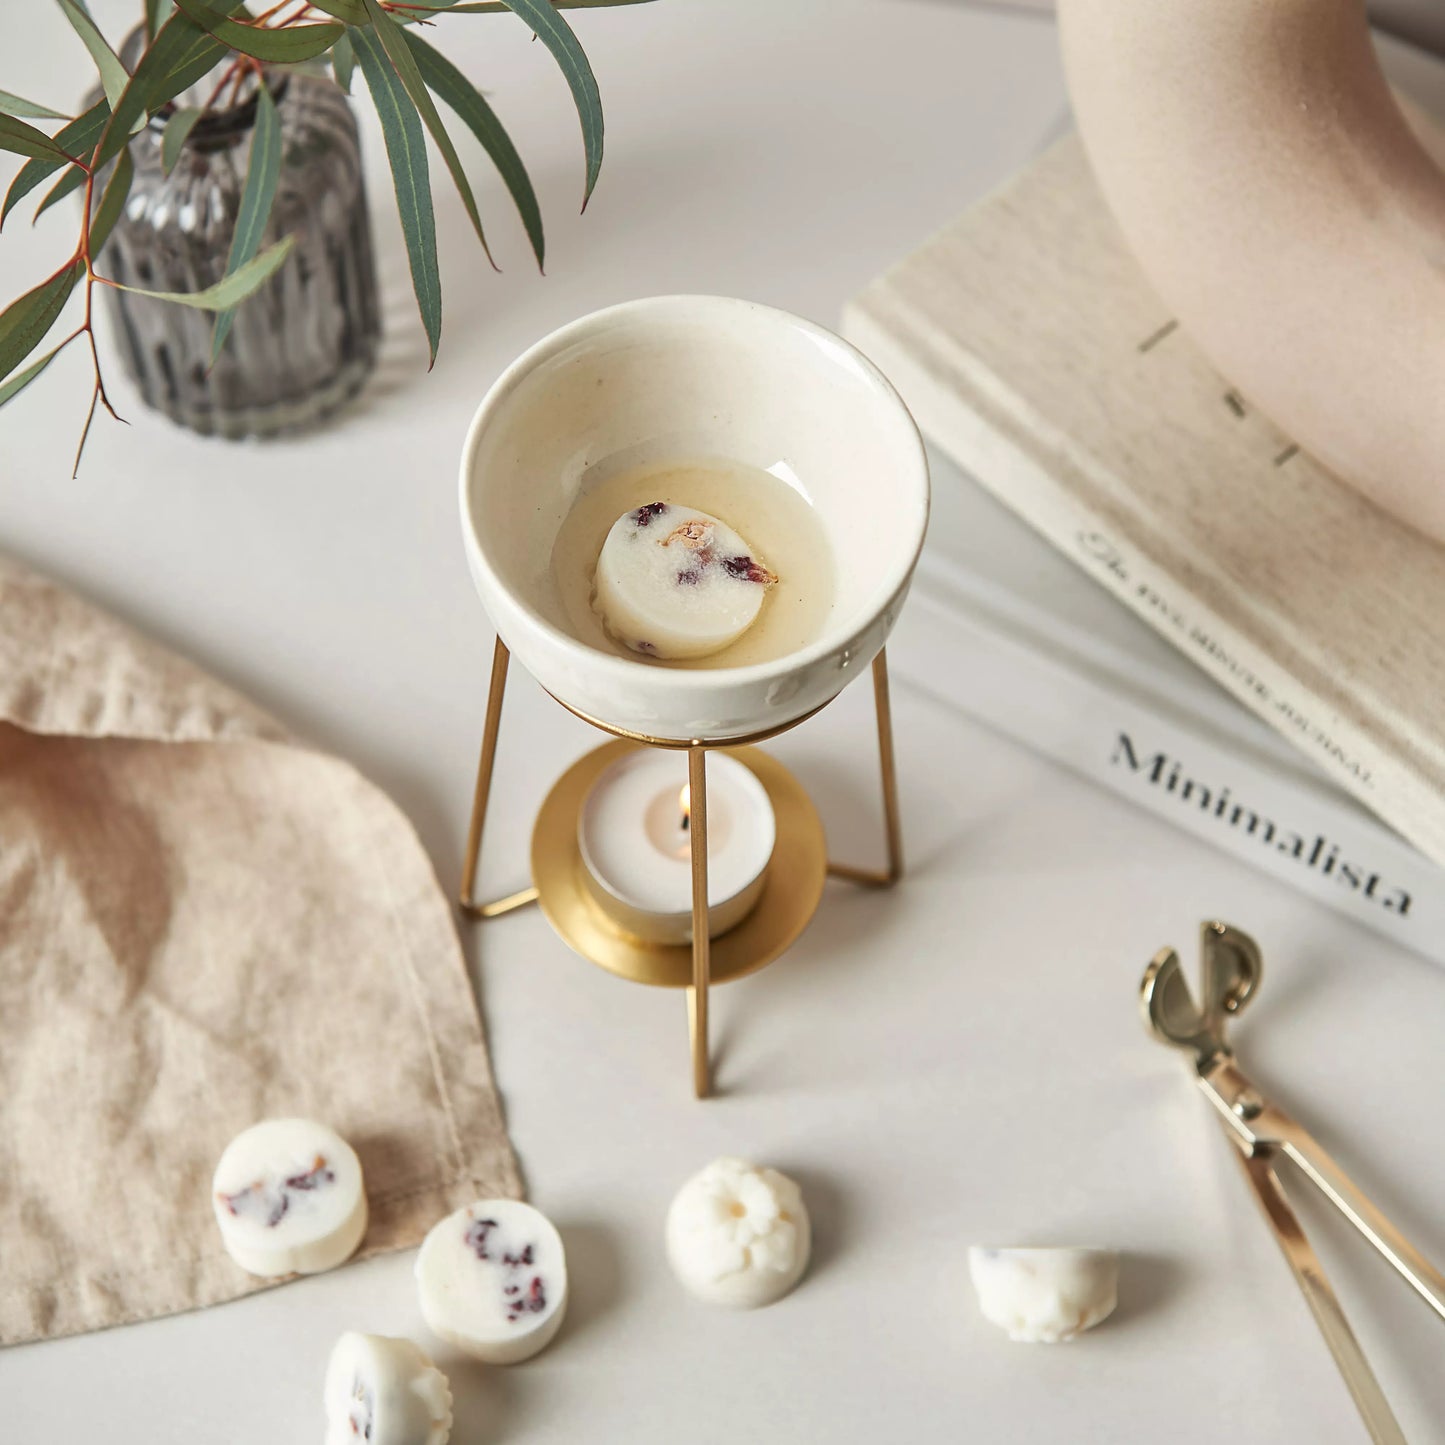 Our Sweet Orchard Wax Melts slowly melt in our bronze wax warmer, heated by a tea light beneath it.